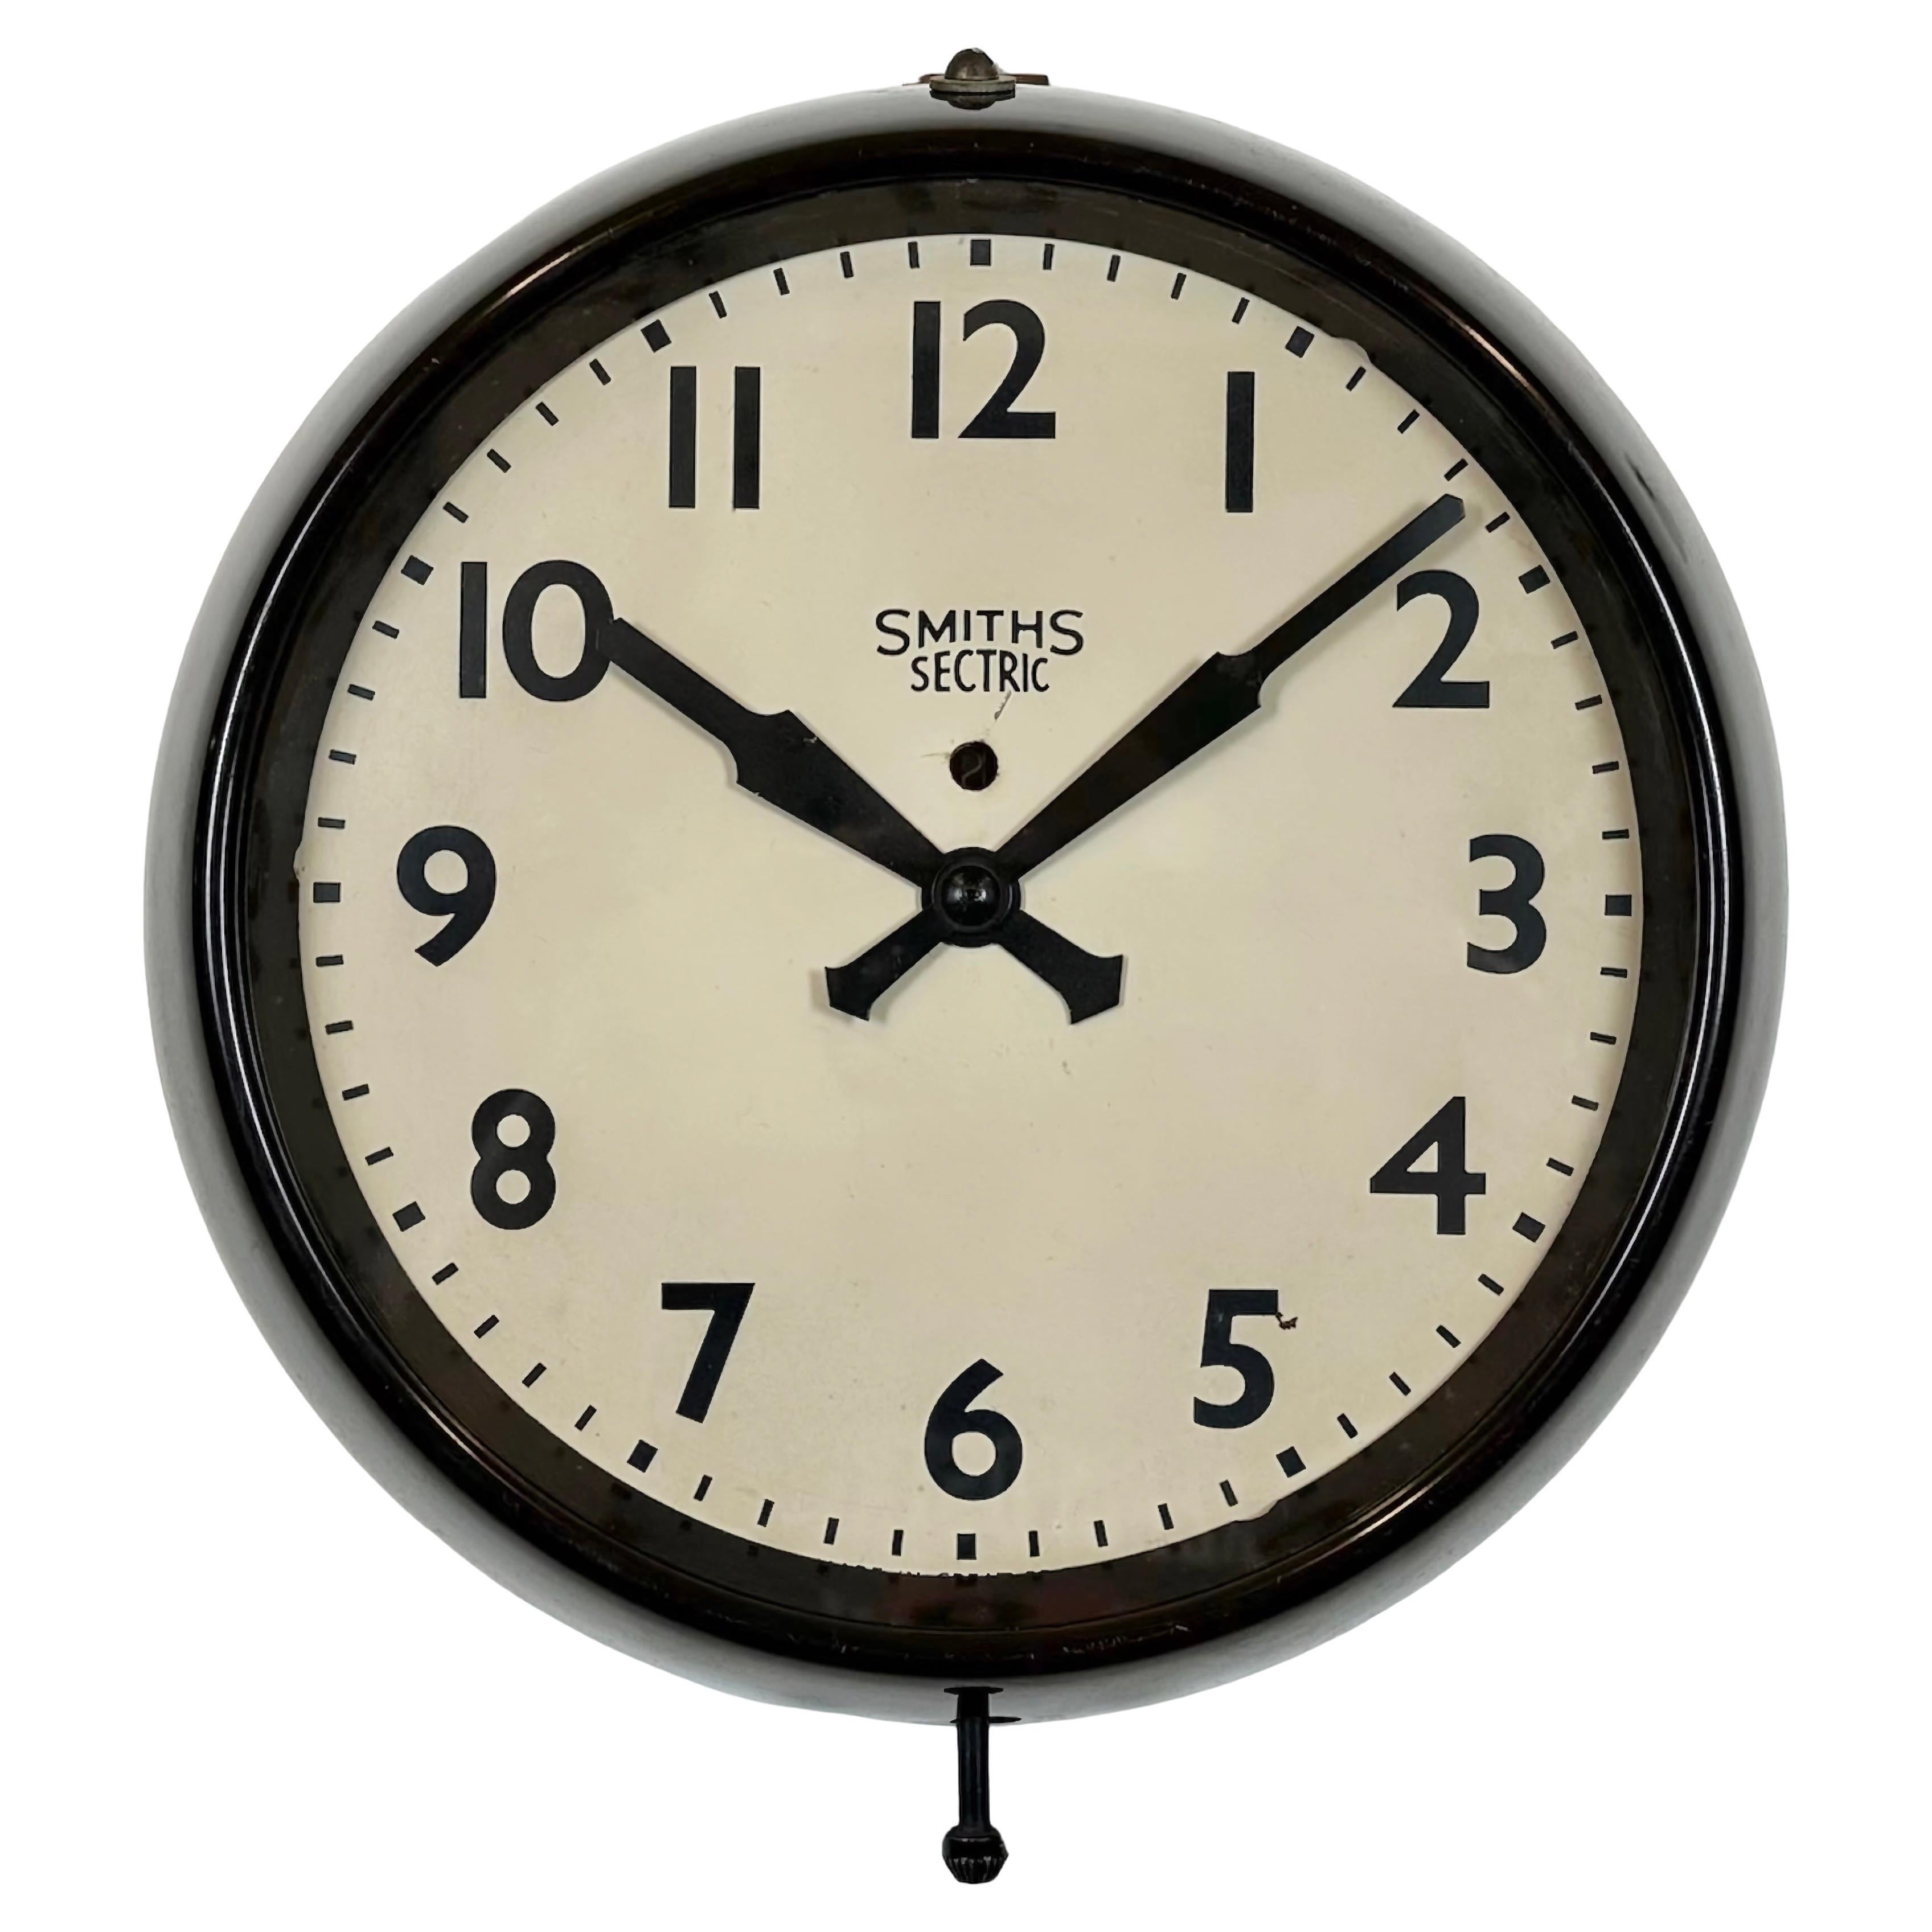 Vintage Brown Bakelite Electric Wall Clock from Smiths Sectric, 1950s